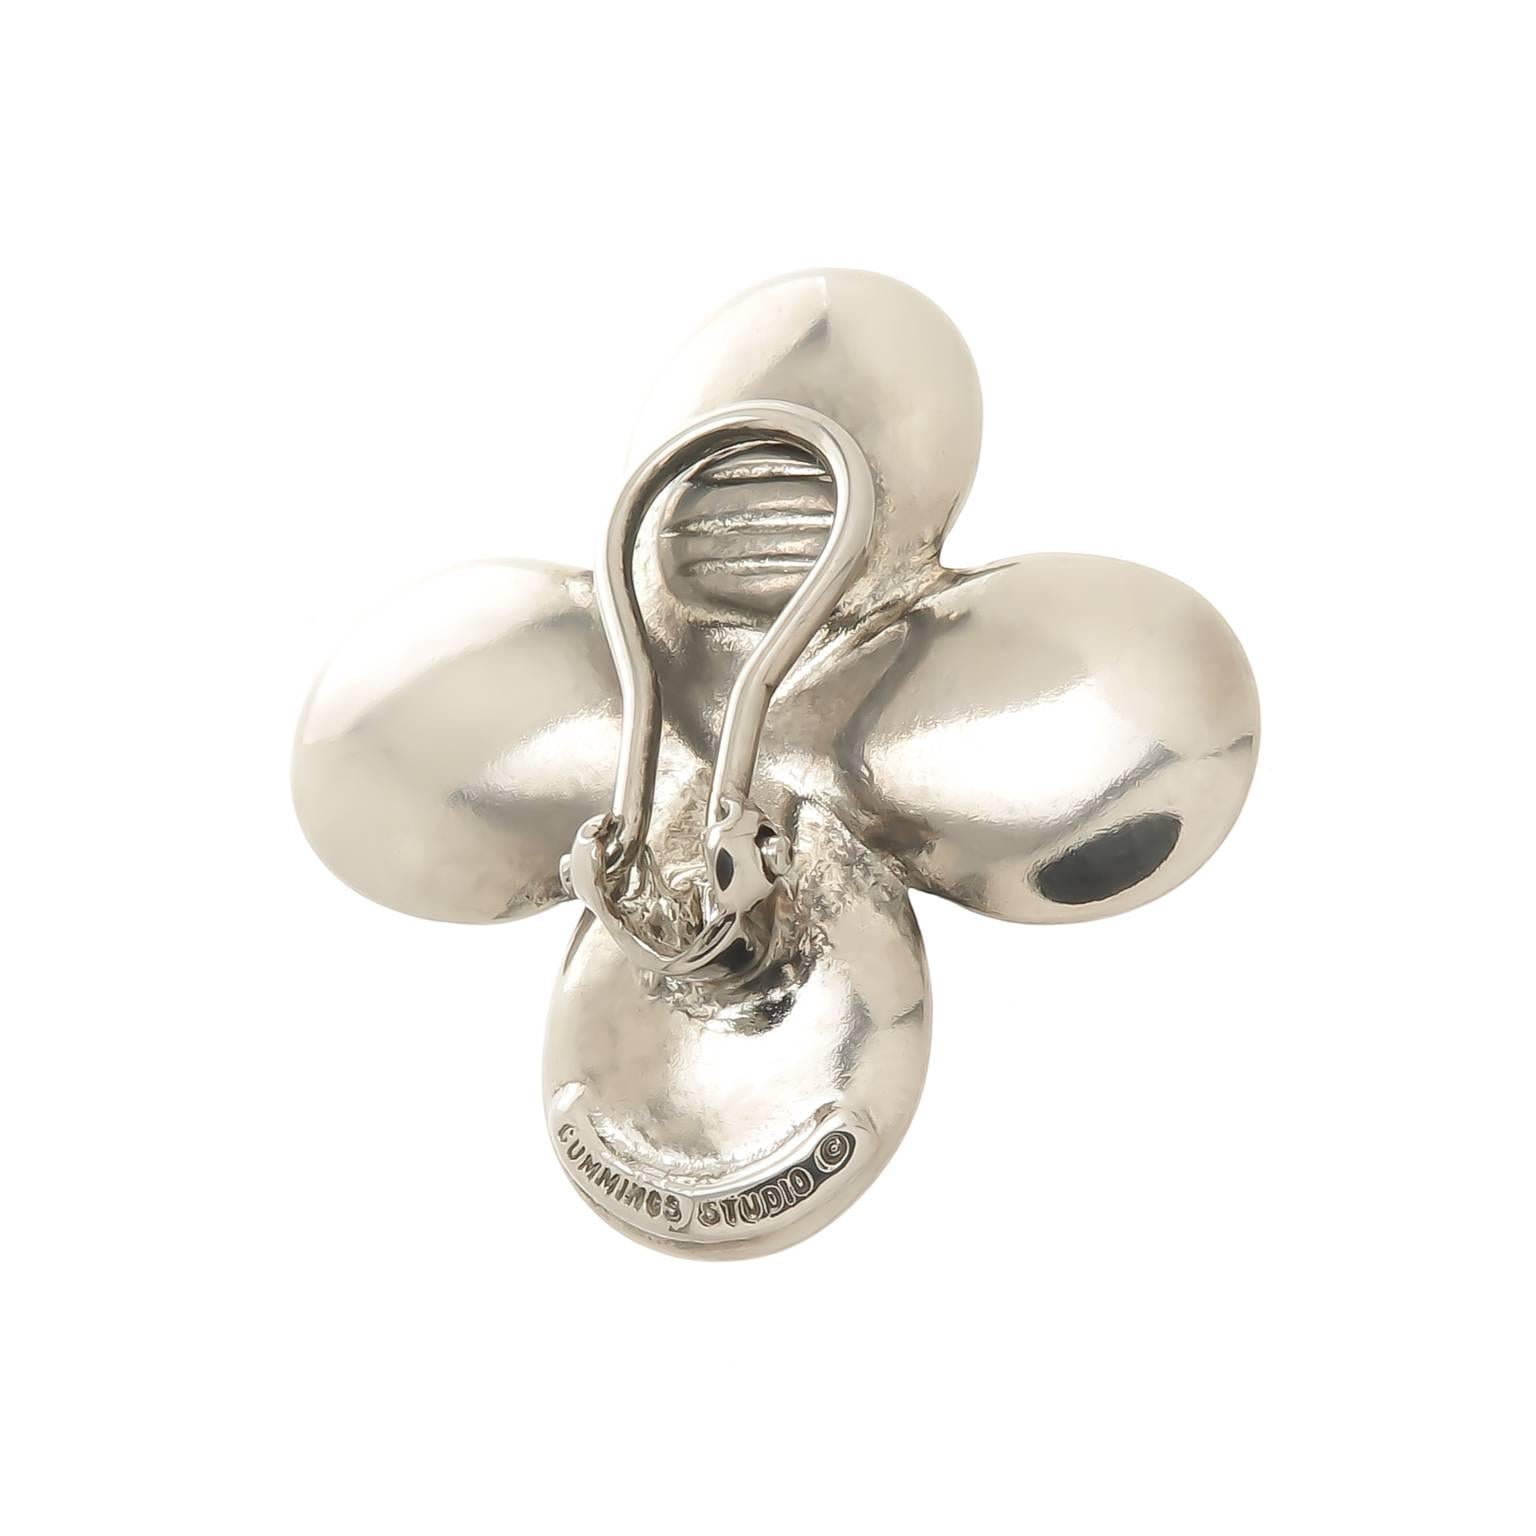 Circa 1980 Angela Cummings studios Sterling Silver Flower form Earrings, measuring 1 1/4 inch in diameter. Having an Omega Clip back back to which a post can be easily added if desired. 